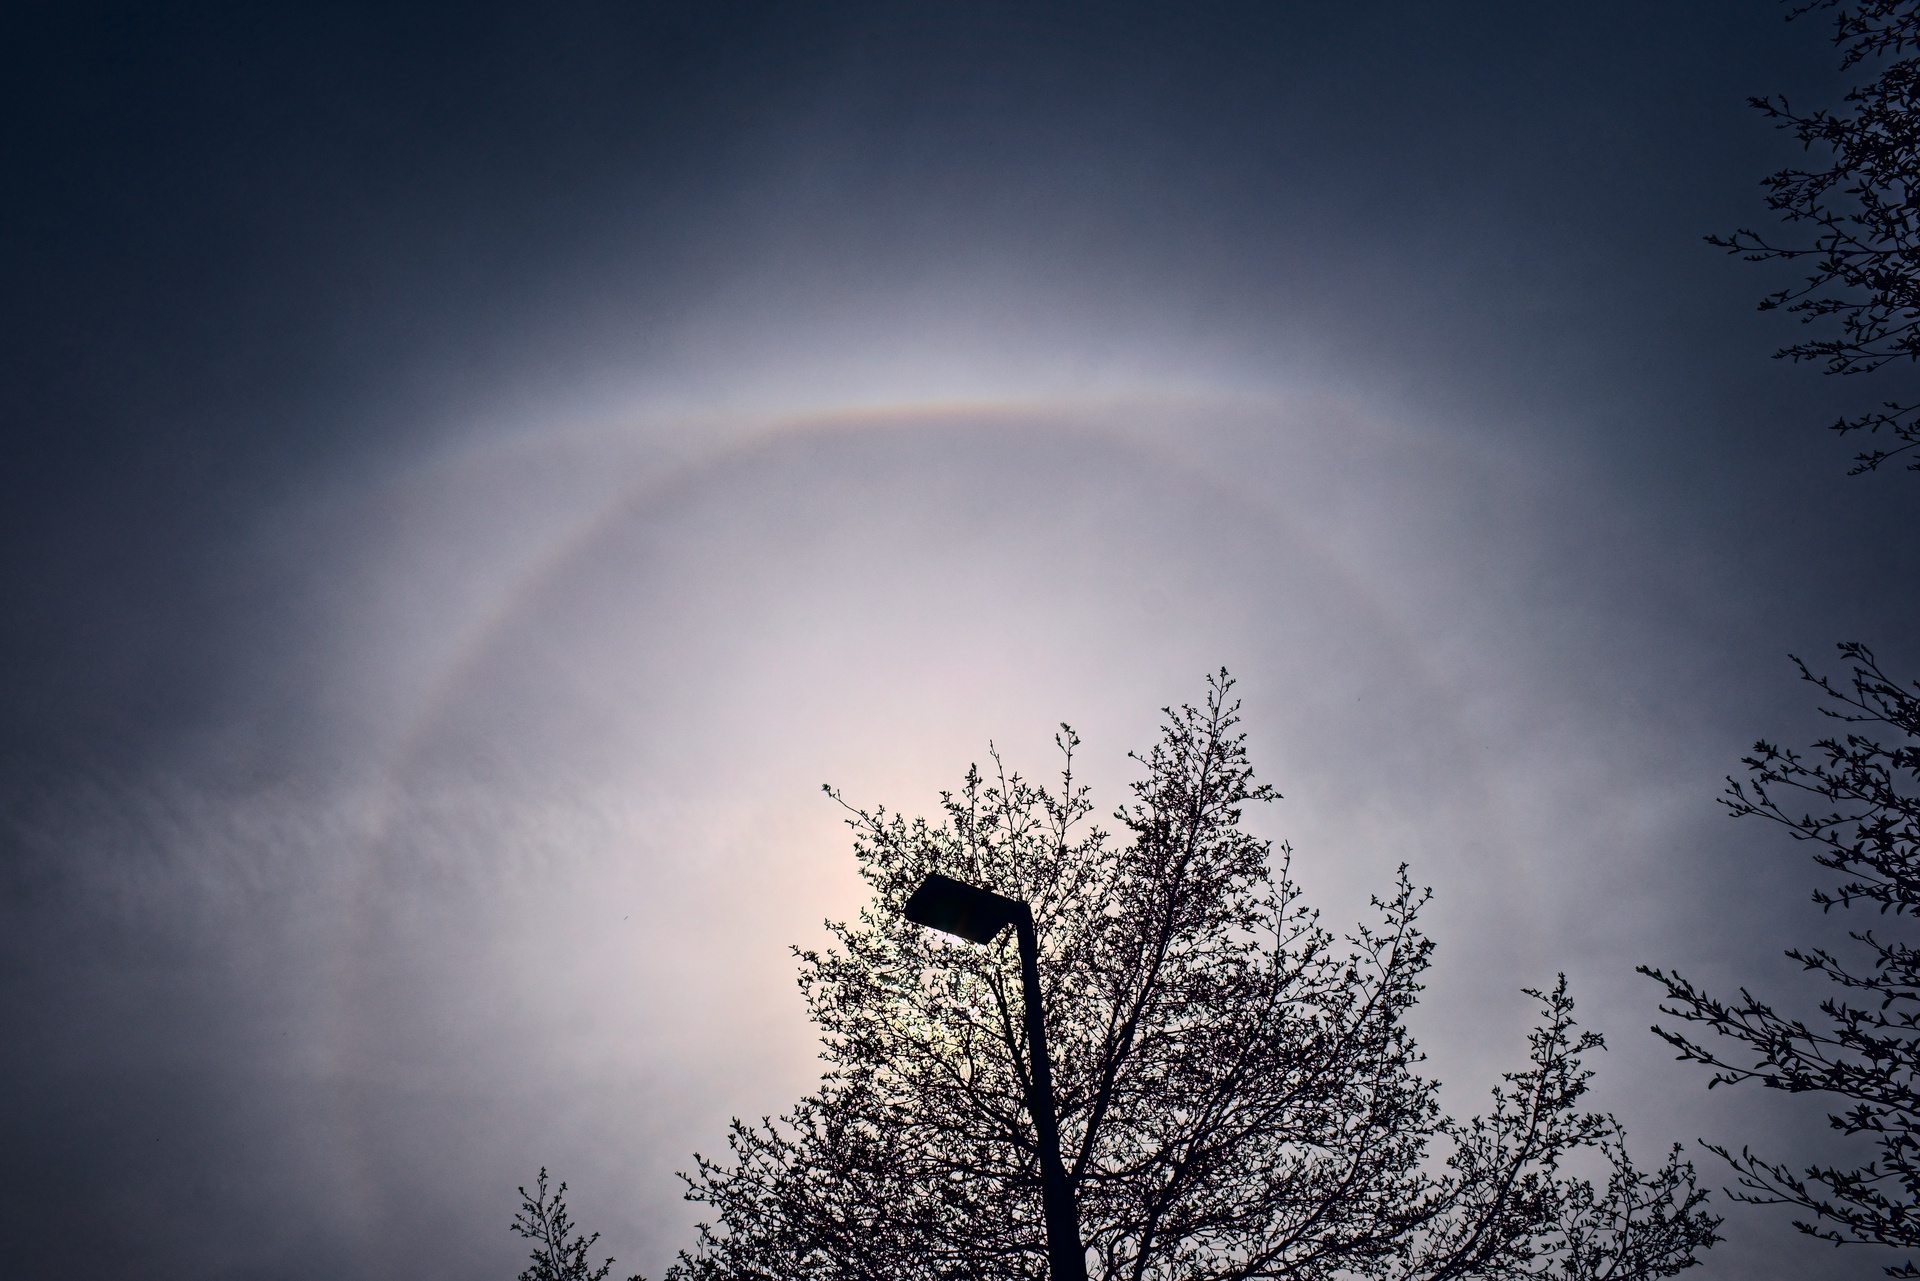 Solar Halo and Upper Tangent Arc